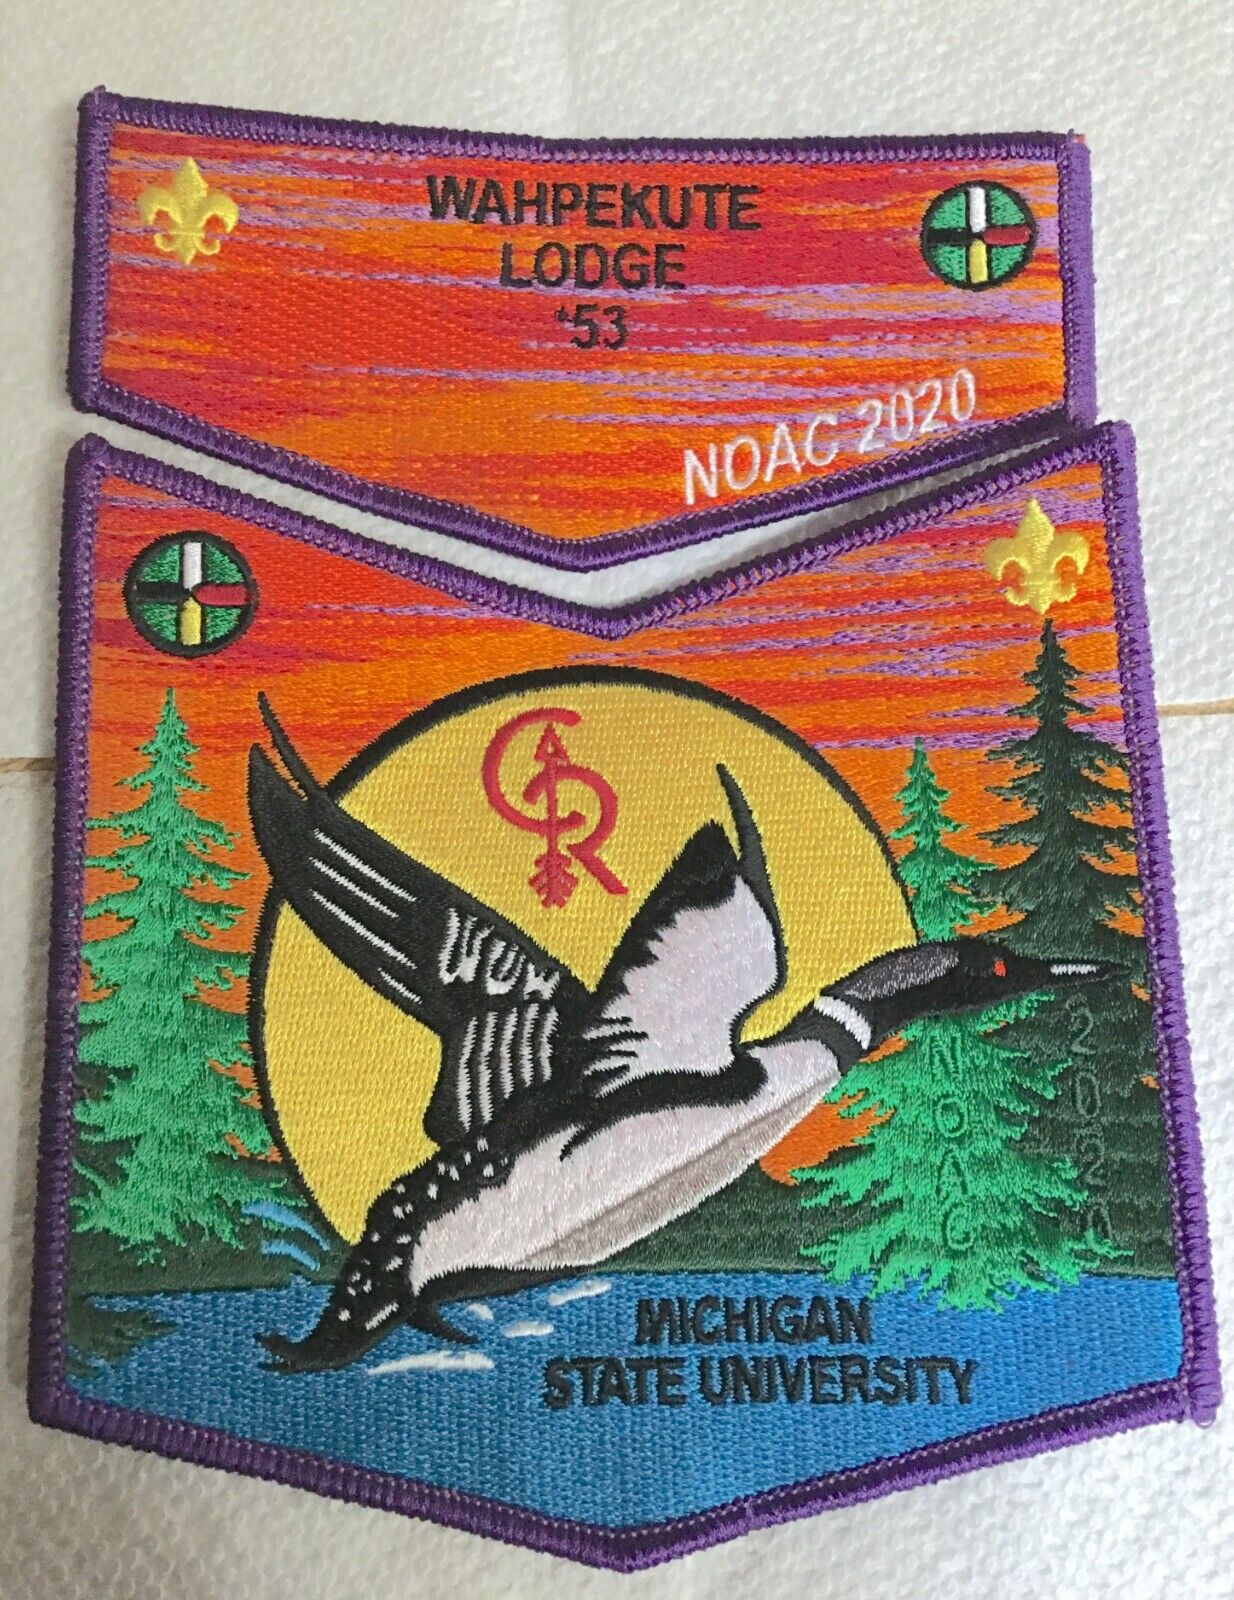 New 2020 OA NOAC Flap Patch Wahpekute Lodge 175 made Central Region Scouts